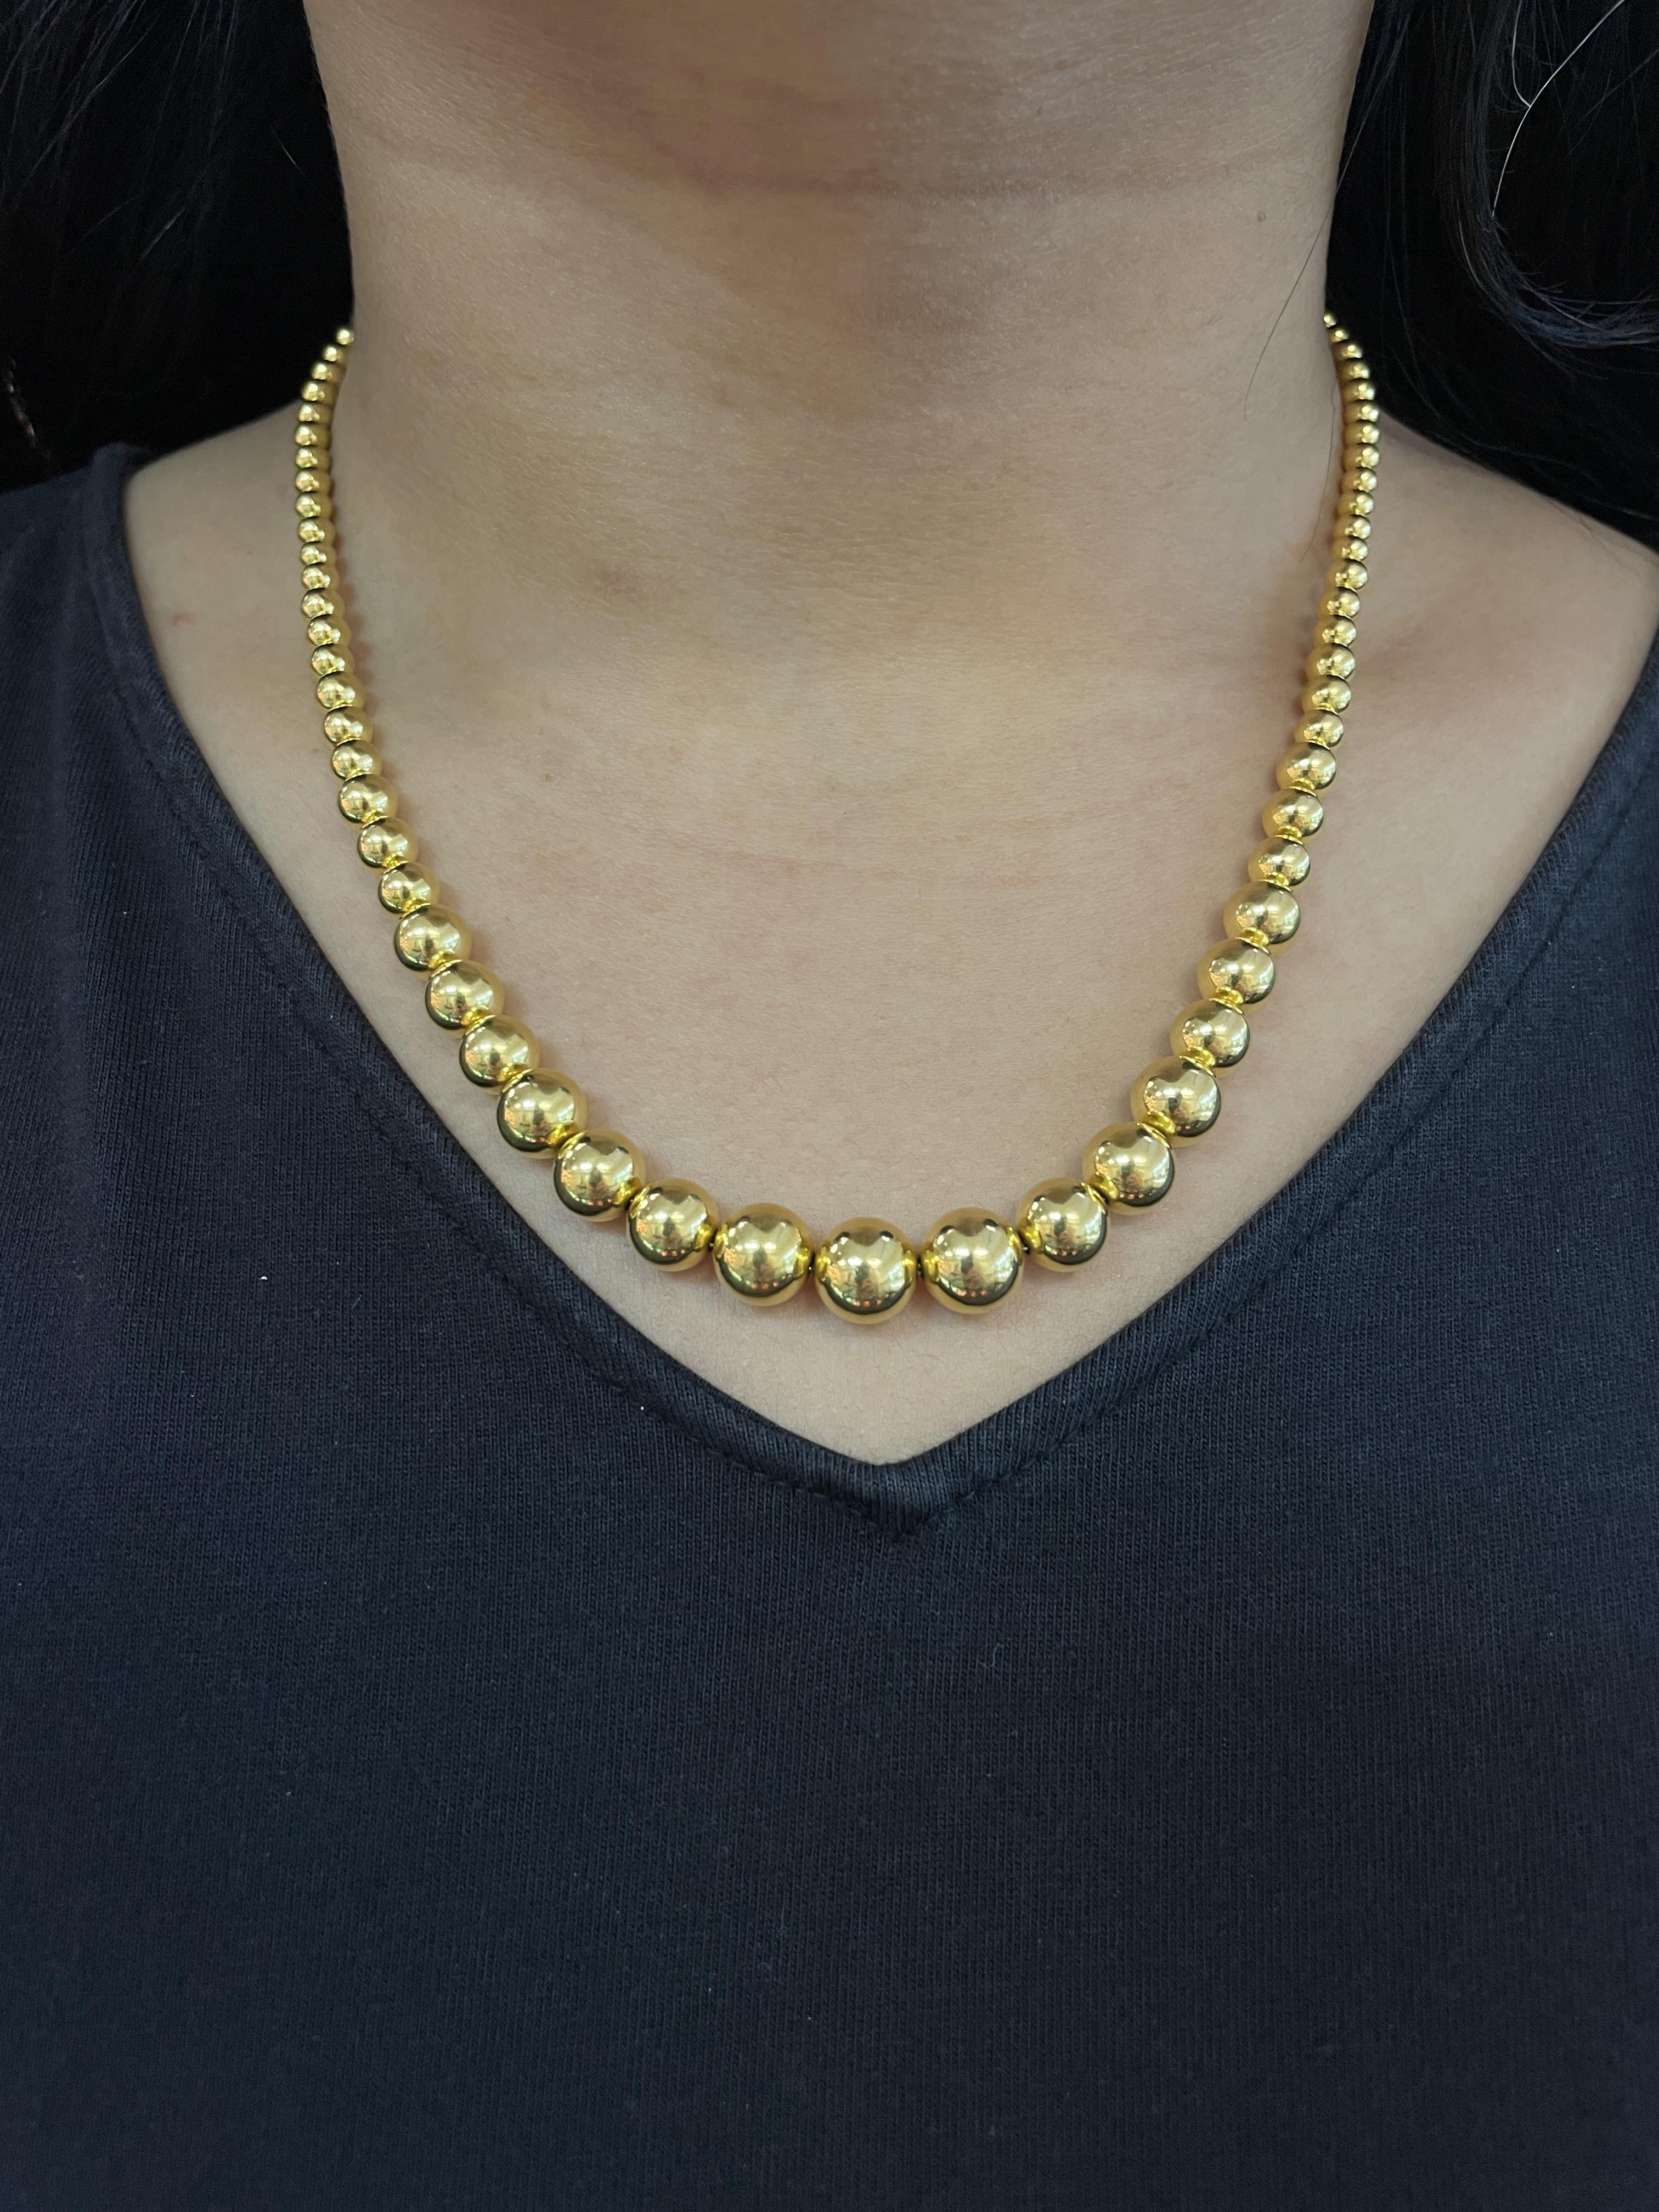 A GRADUATED GOLD BEAD NECKLACE - Image 4 of 4